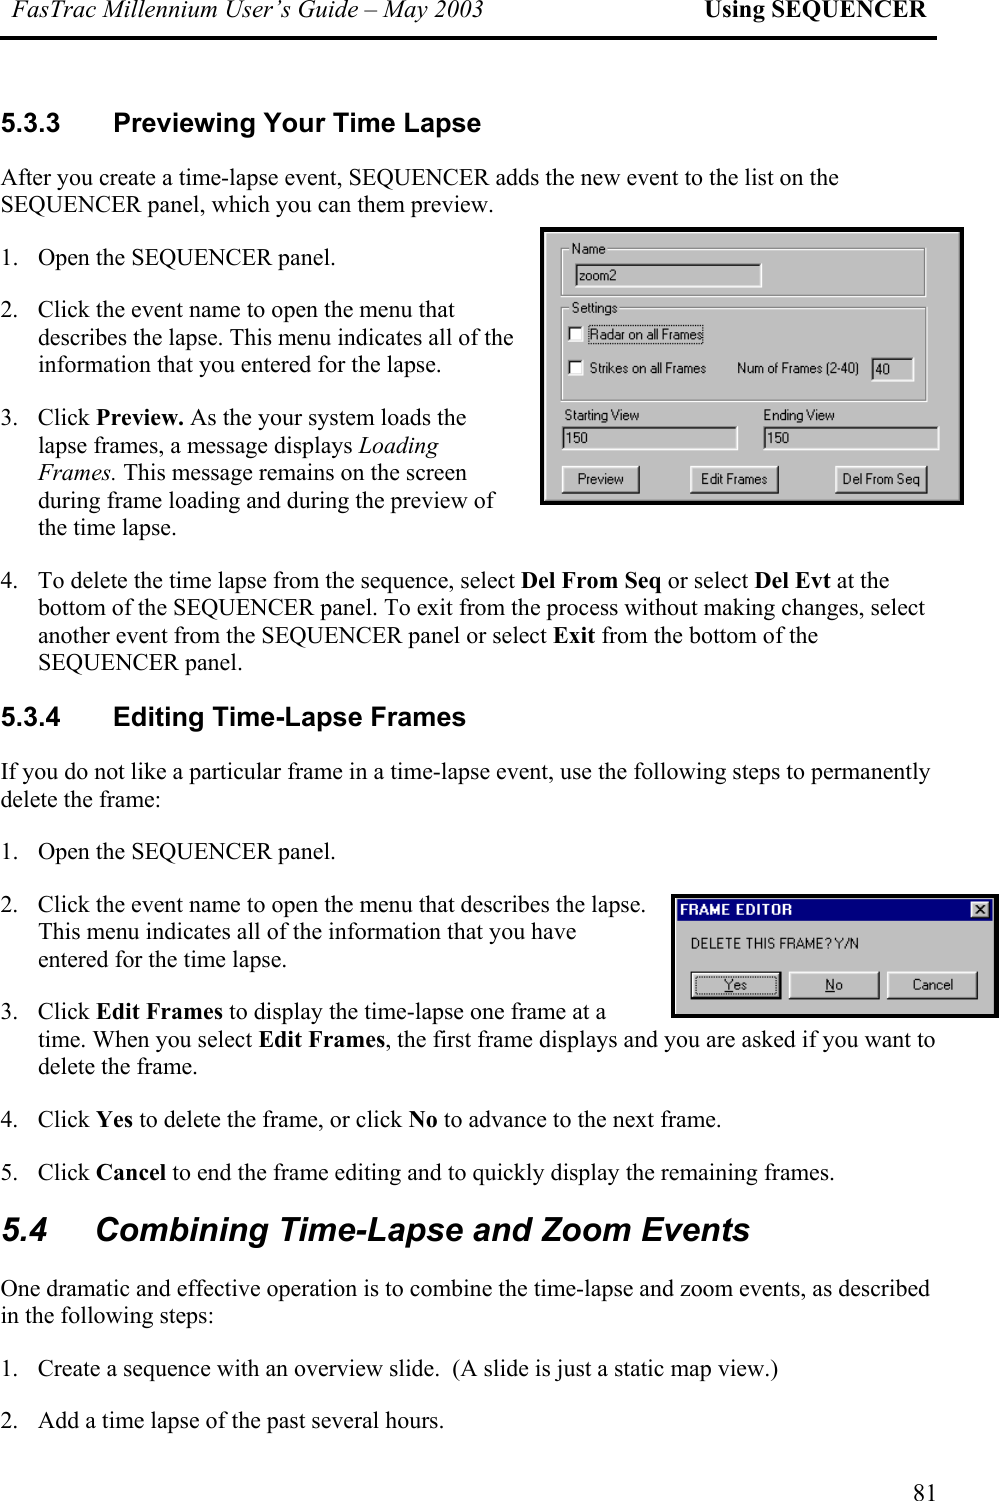 FasTrac Millennium User’s Guide – May 2003 Using SEQUENCER 5.3.3  Previewing Your Time Lapse After you create a time-lapse event, SEQUENCER adds the new event to the list on the SEQUENCER panel, which you can them preview. 1.  Open the SEQUENCER panel. 2.  Click the event name to open the menu that describes the lapse. This menu indicates all of the information that you entered for the lapse. 3. Click Preview. As the your system loads the lapse frames, a message displays Loading Frames. This message remains on the screen during frame loading and during the preview of the time lapse.  4. es, select  SEQUENCER panel or select Exit from the bottom of the SEQUENCER panel. 5.3.4  Editing Time-Lapse Frames a particular frame in a time-lapse event, use the following steps to permanently delete the frame: 1.  Open the SEQUENCER panel. 2. s all of the information that you have entered for the time lapse. 3. lect Edit Frames, the first frame displays and you are asked if you want to delete the frame.  4. Click Yes to delete the frame, or click No to advance to the next frame.  5. Click Cancel to end the frame editing and to quickly display the remaining frames. 5.4  Combining Time-Lapse and Zoom Events tive operation is to combine the time-lapse and zoom events, as described in the following steps: 1.  Create a sequence with an overview slide.  (A slide is just a static map view.) 2.  Add a time lapse of the past several hours. To delete the time lapse from the sequence, select Del From Seq or select Del Evt at the bottom of the SEQUENCER panel. To exit from the process without making changanother event from theIf you do not like Click the event name to open the menu that describes the lapse. This menu indicateClick Edit Frames to display the time-lapse one frame at a time. When you seOne dramatic and effec81 